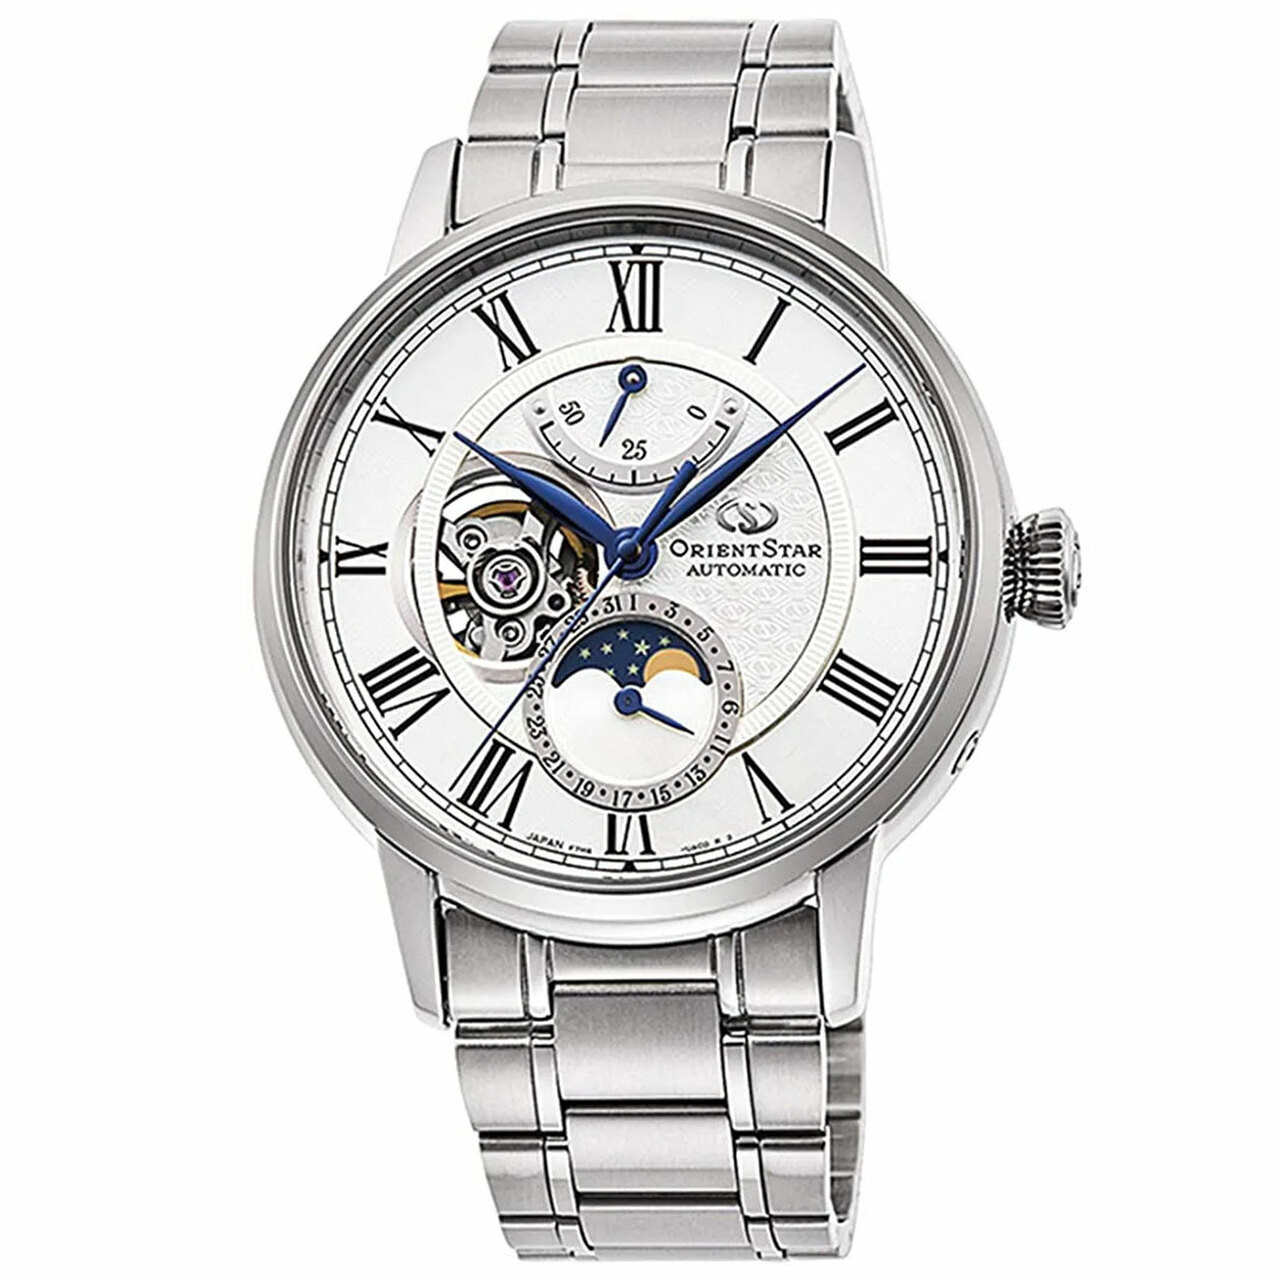 Orient Star RE-AY0102S00B Mechanical Moon Phase Classic REAY0102S00B